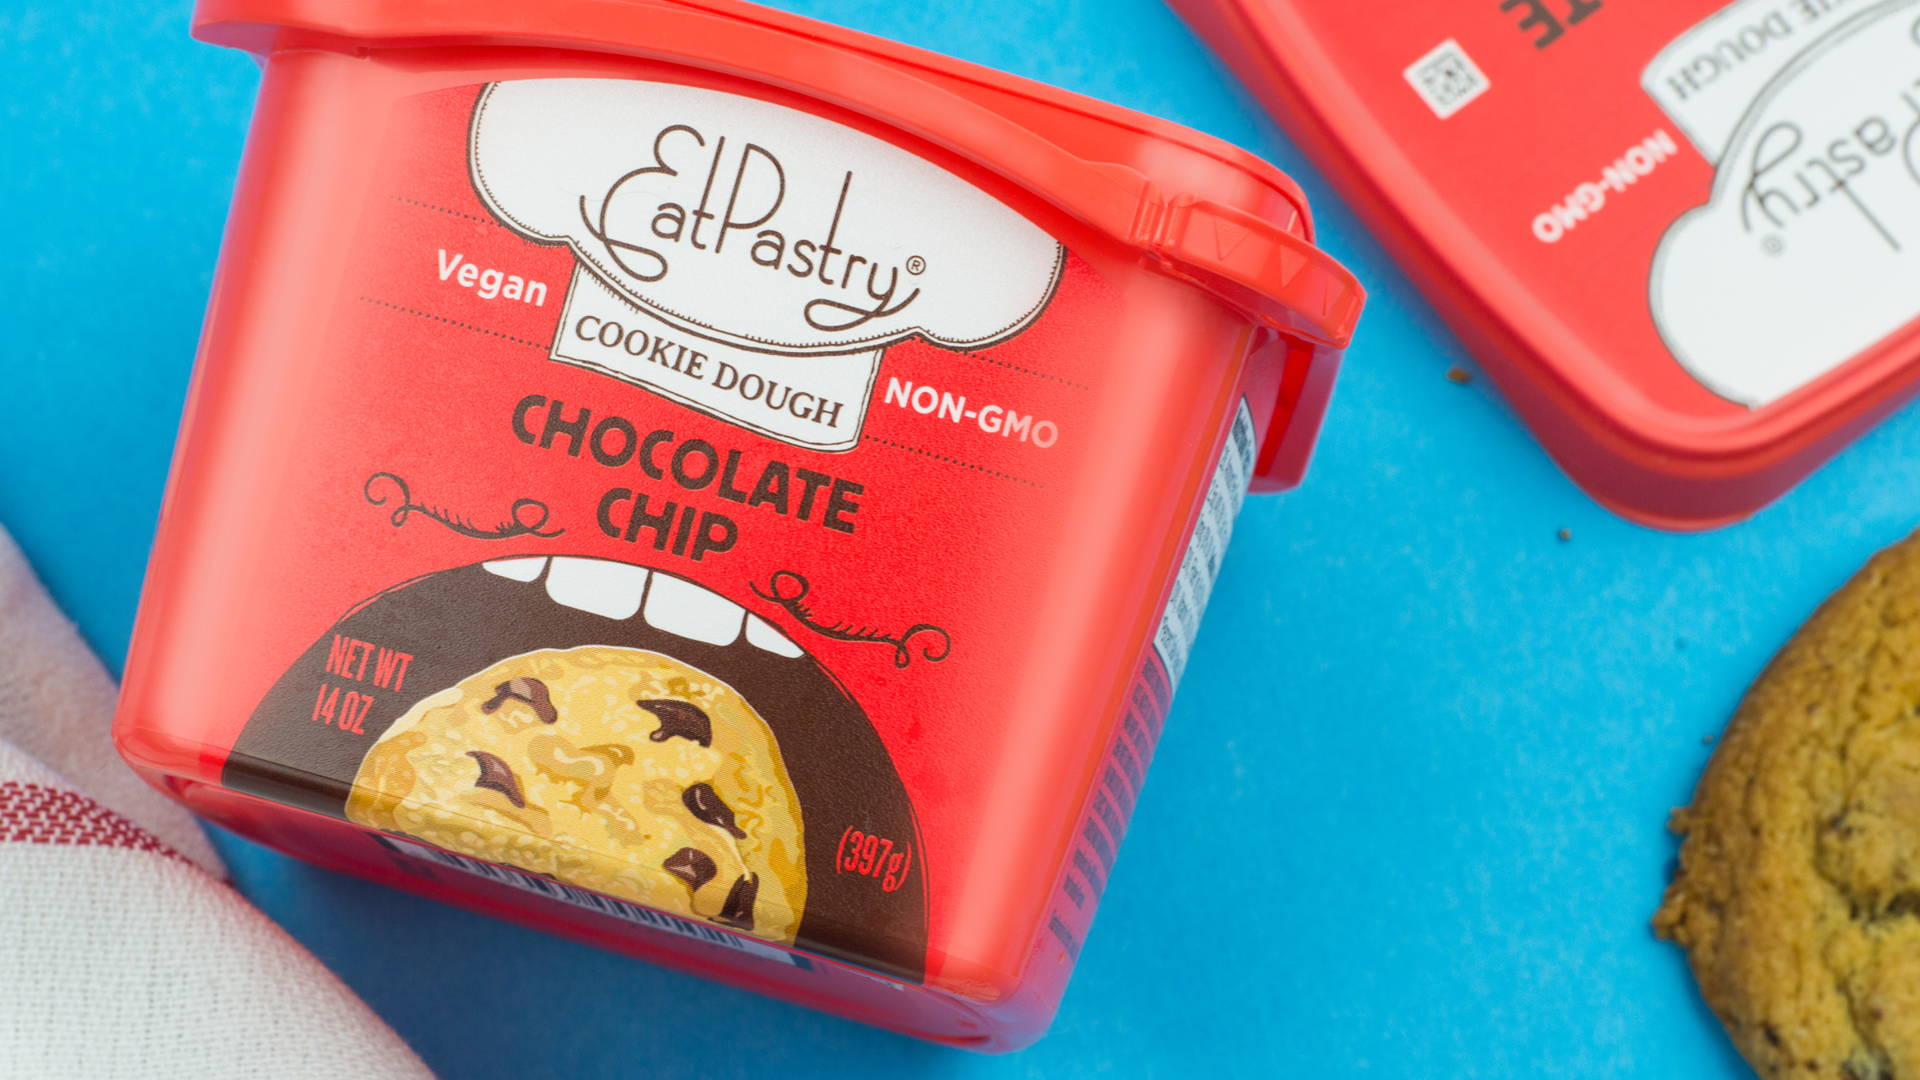 Featured image for Vegan Cookie Dough that Packs a Punch